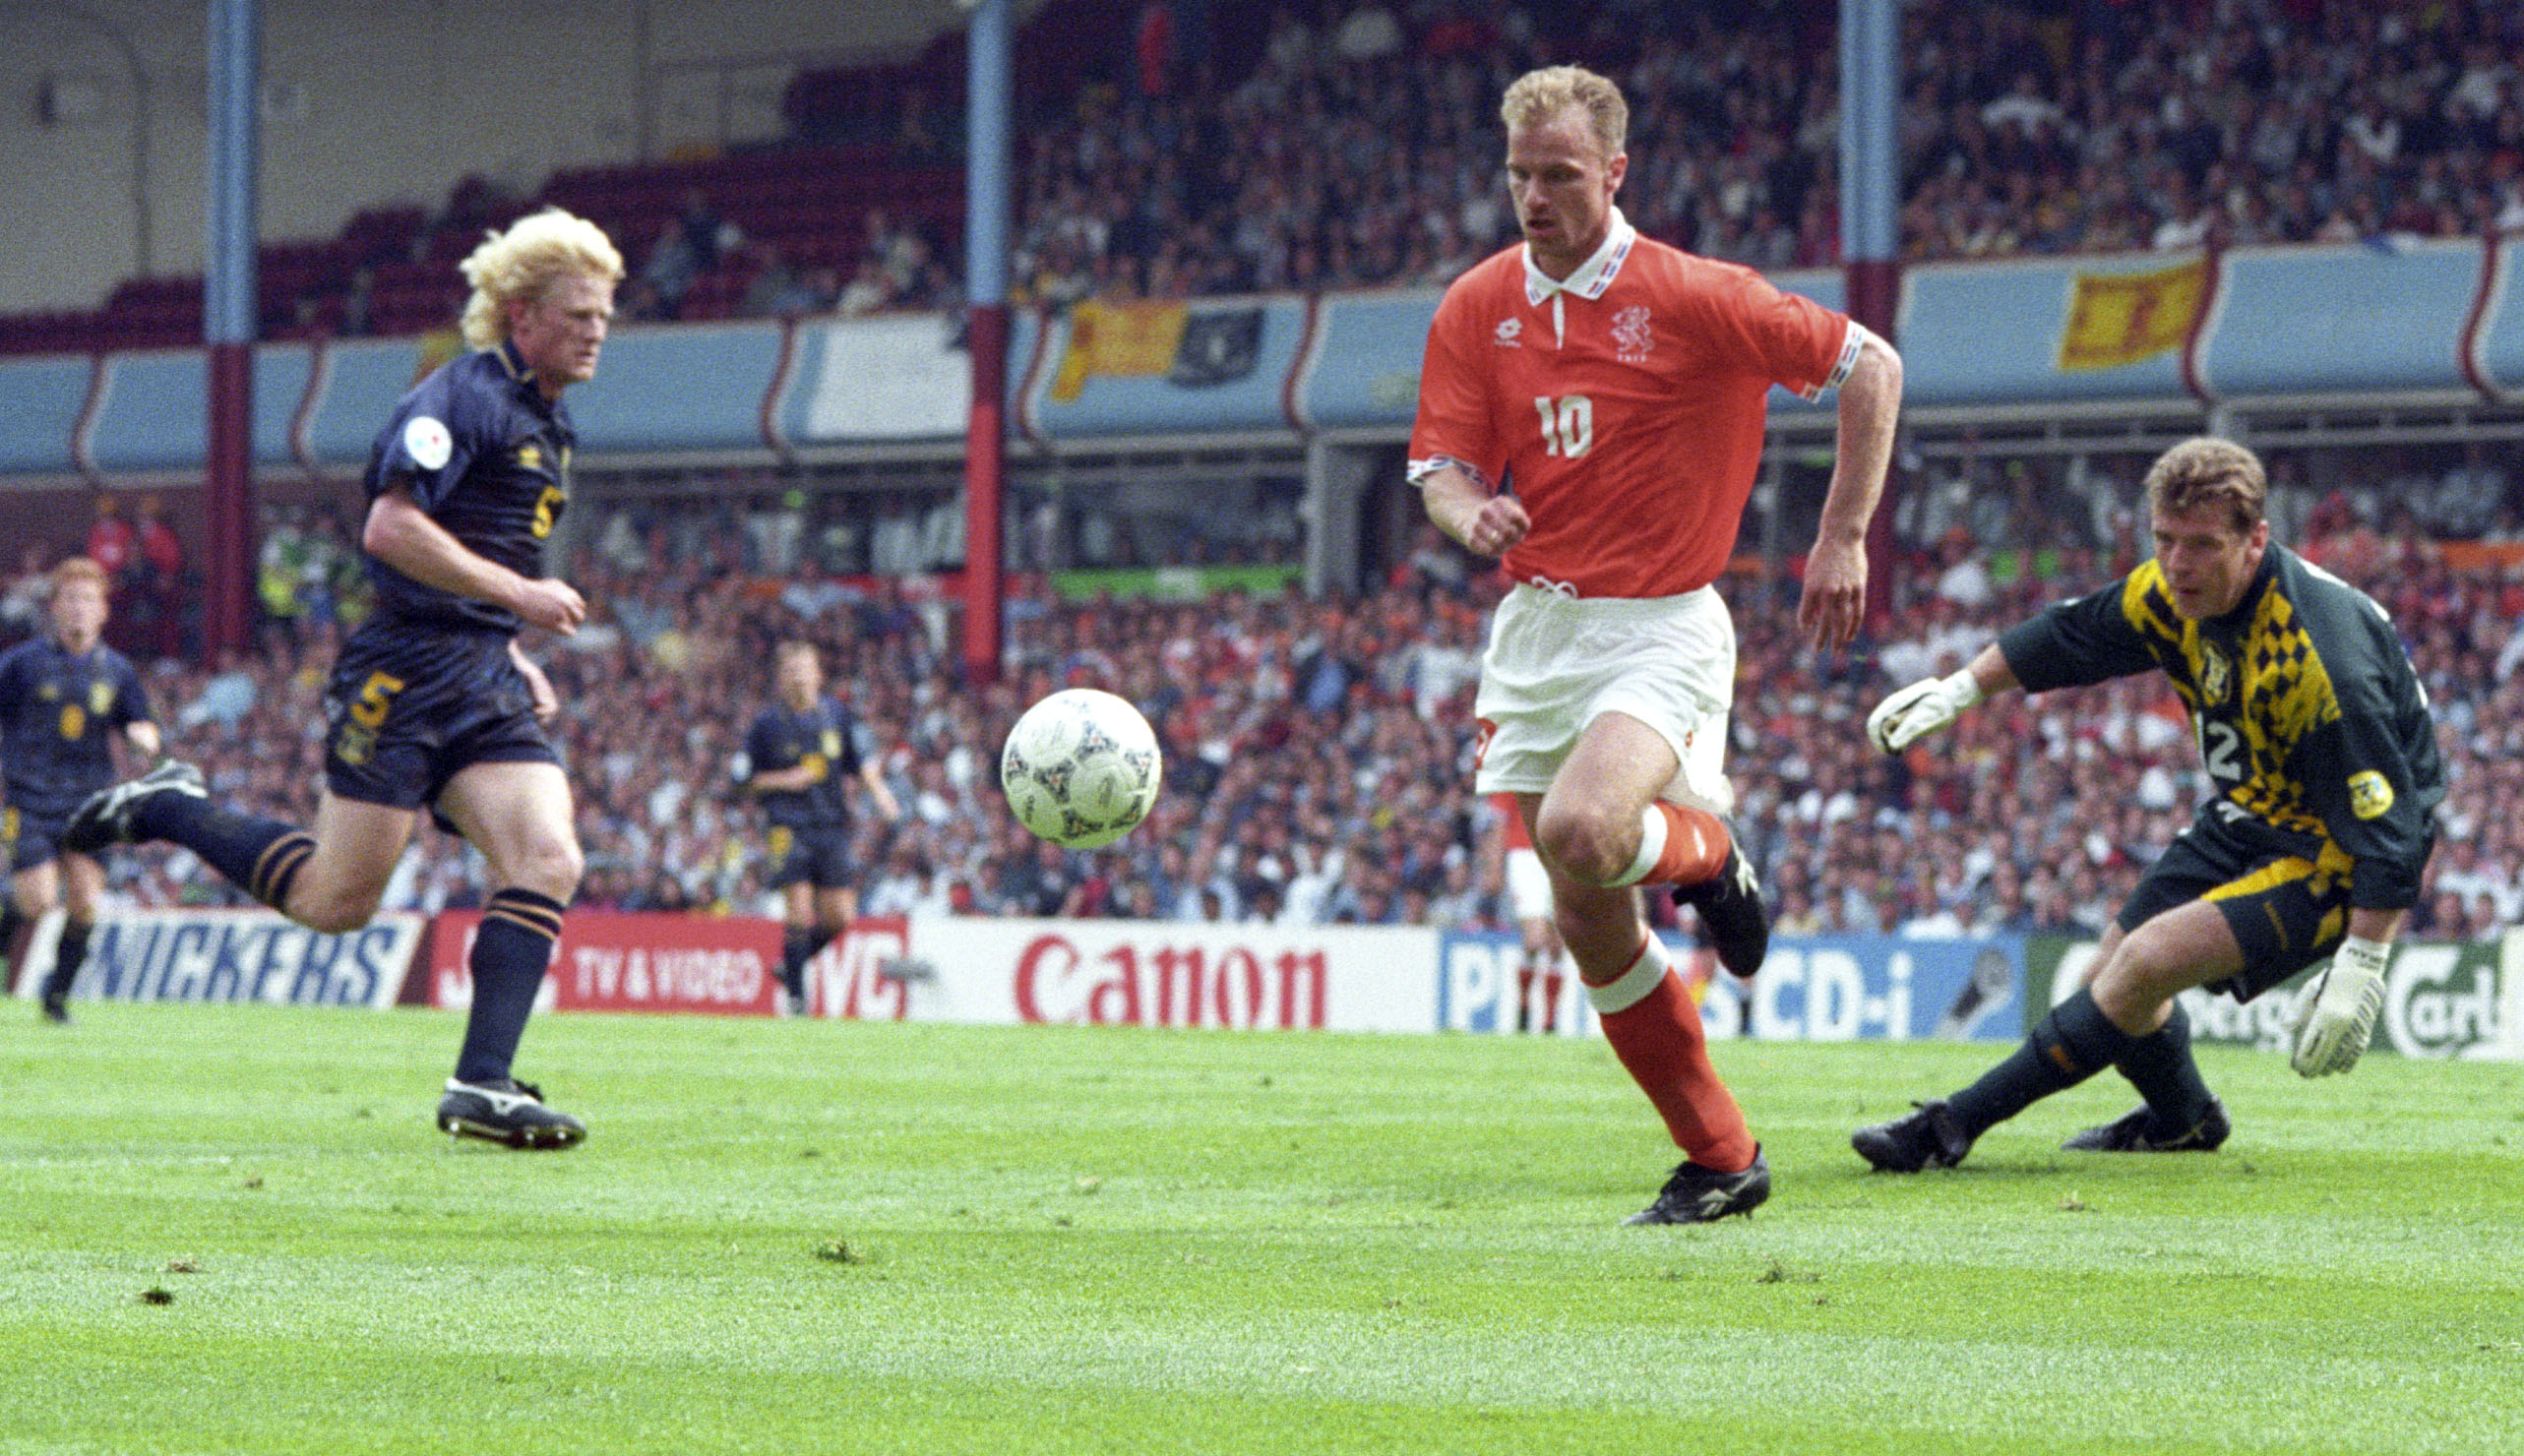 Dennis Bergkamp scored against Scotland at Euro 92 but failed to get the better of Andy Goram four years later.